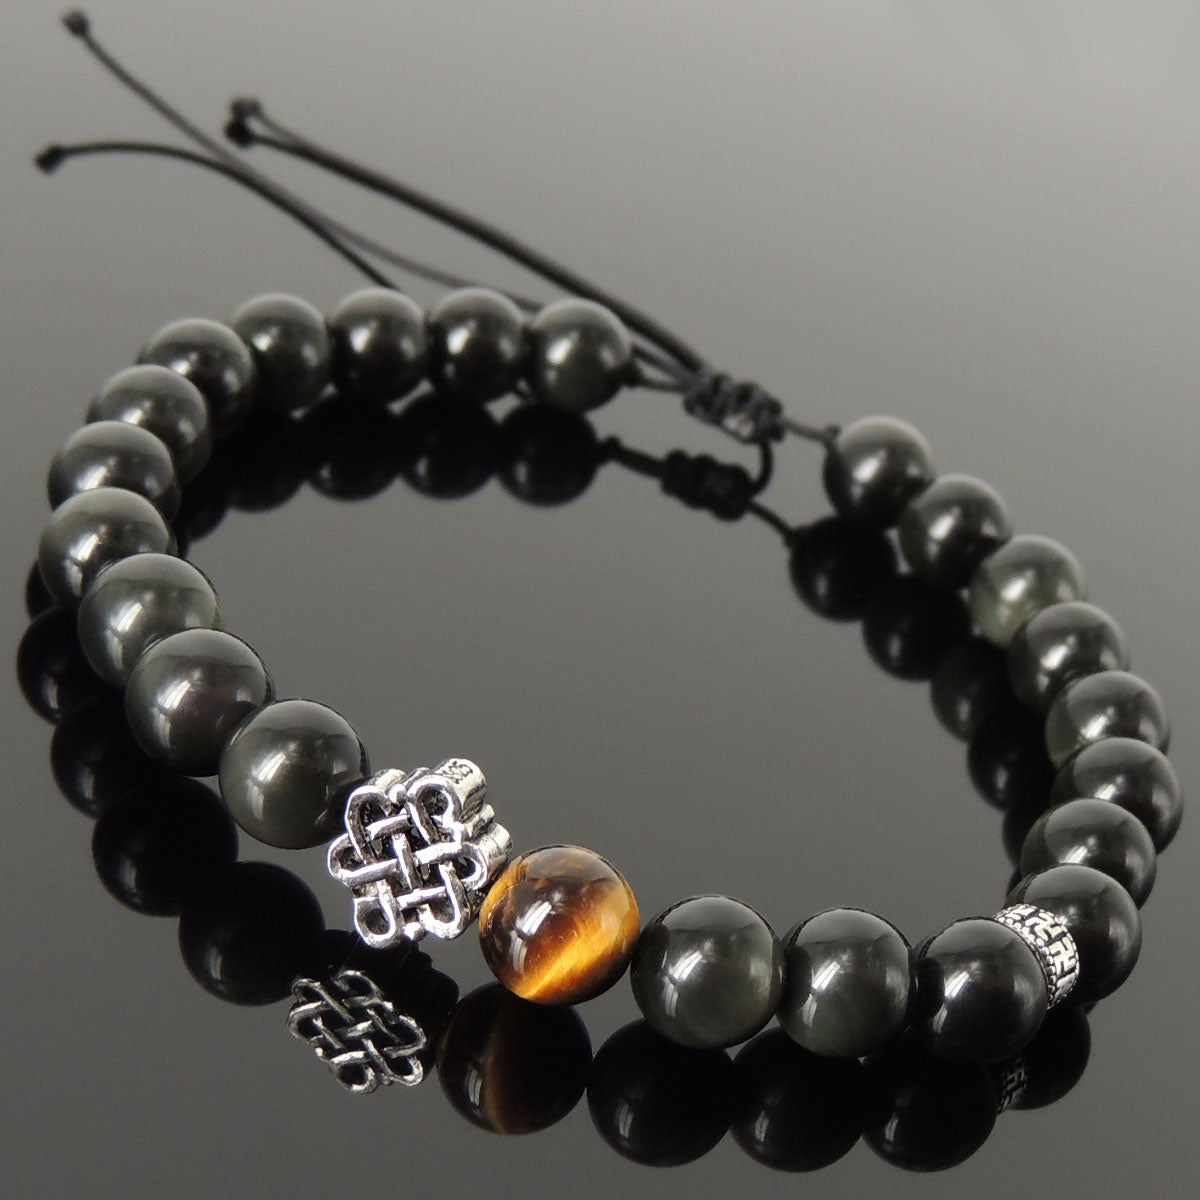 Healing Gemstone Jewelry Handmade Braided Bracelet with 8mm Rainbow Black Obsidian, Grade AAA Brown Tiger Eye, Adjustable Drawstring, S925 Sterling Silver Lucky Knot Charm, Buddhism Spacer Bead BR1757